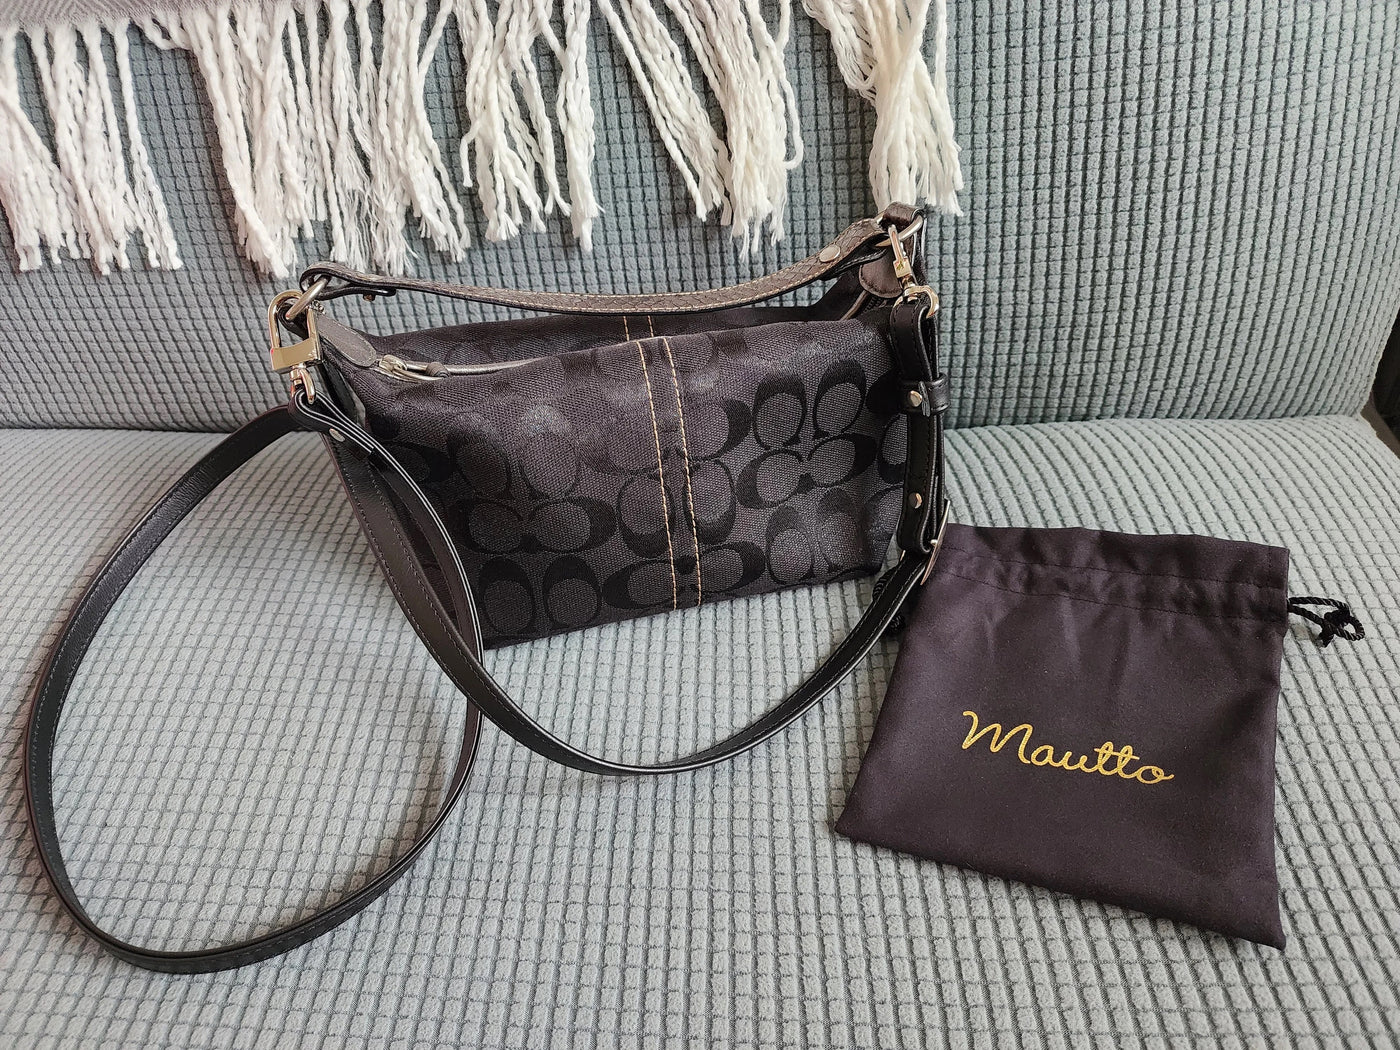 Coach purse with new black leather adjustable cross body strap attached.